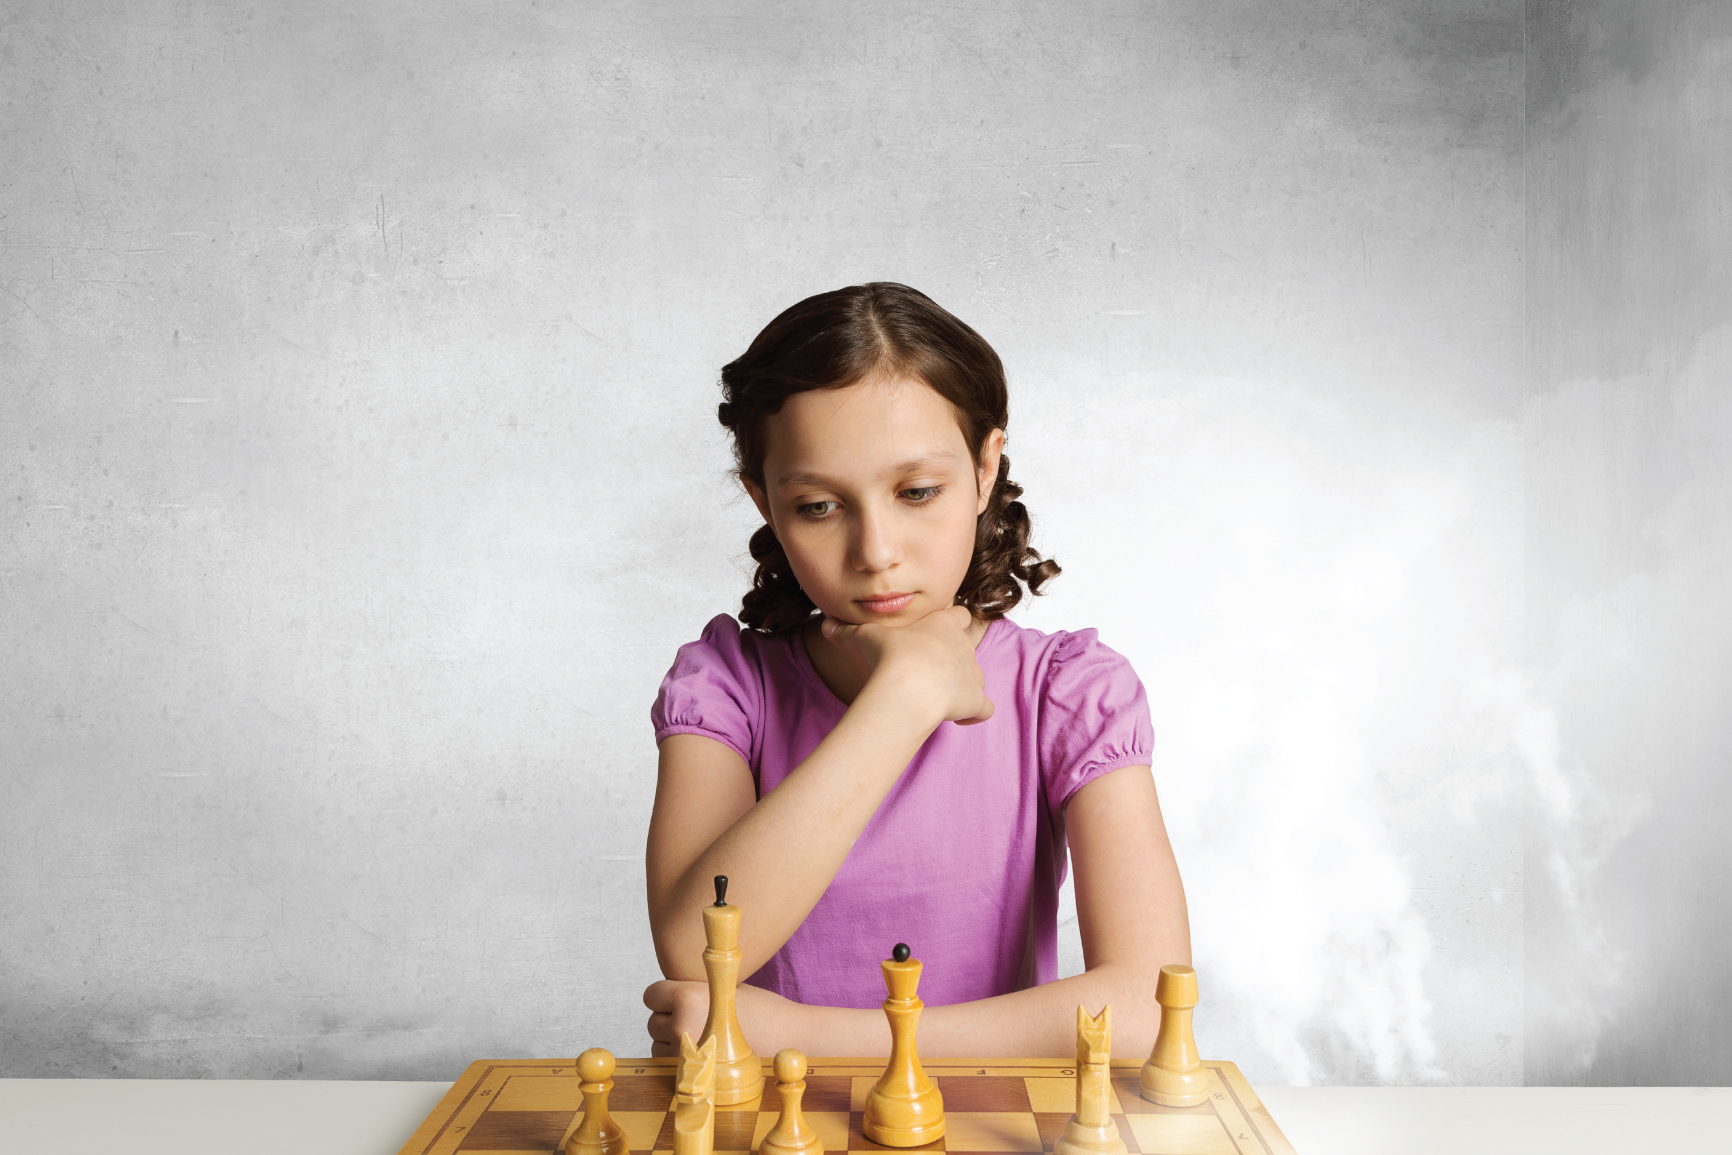 Future Masters Chess Academy – Mastering Chess & Life